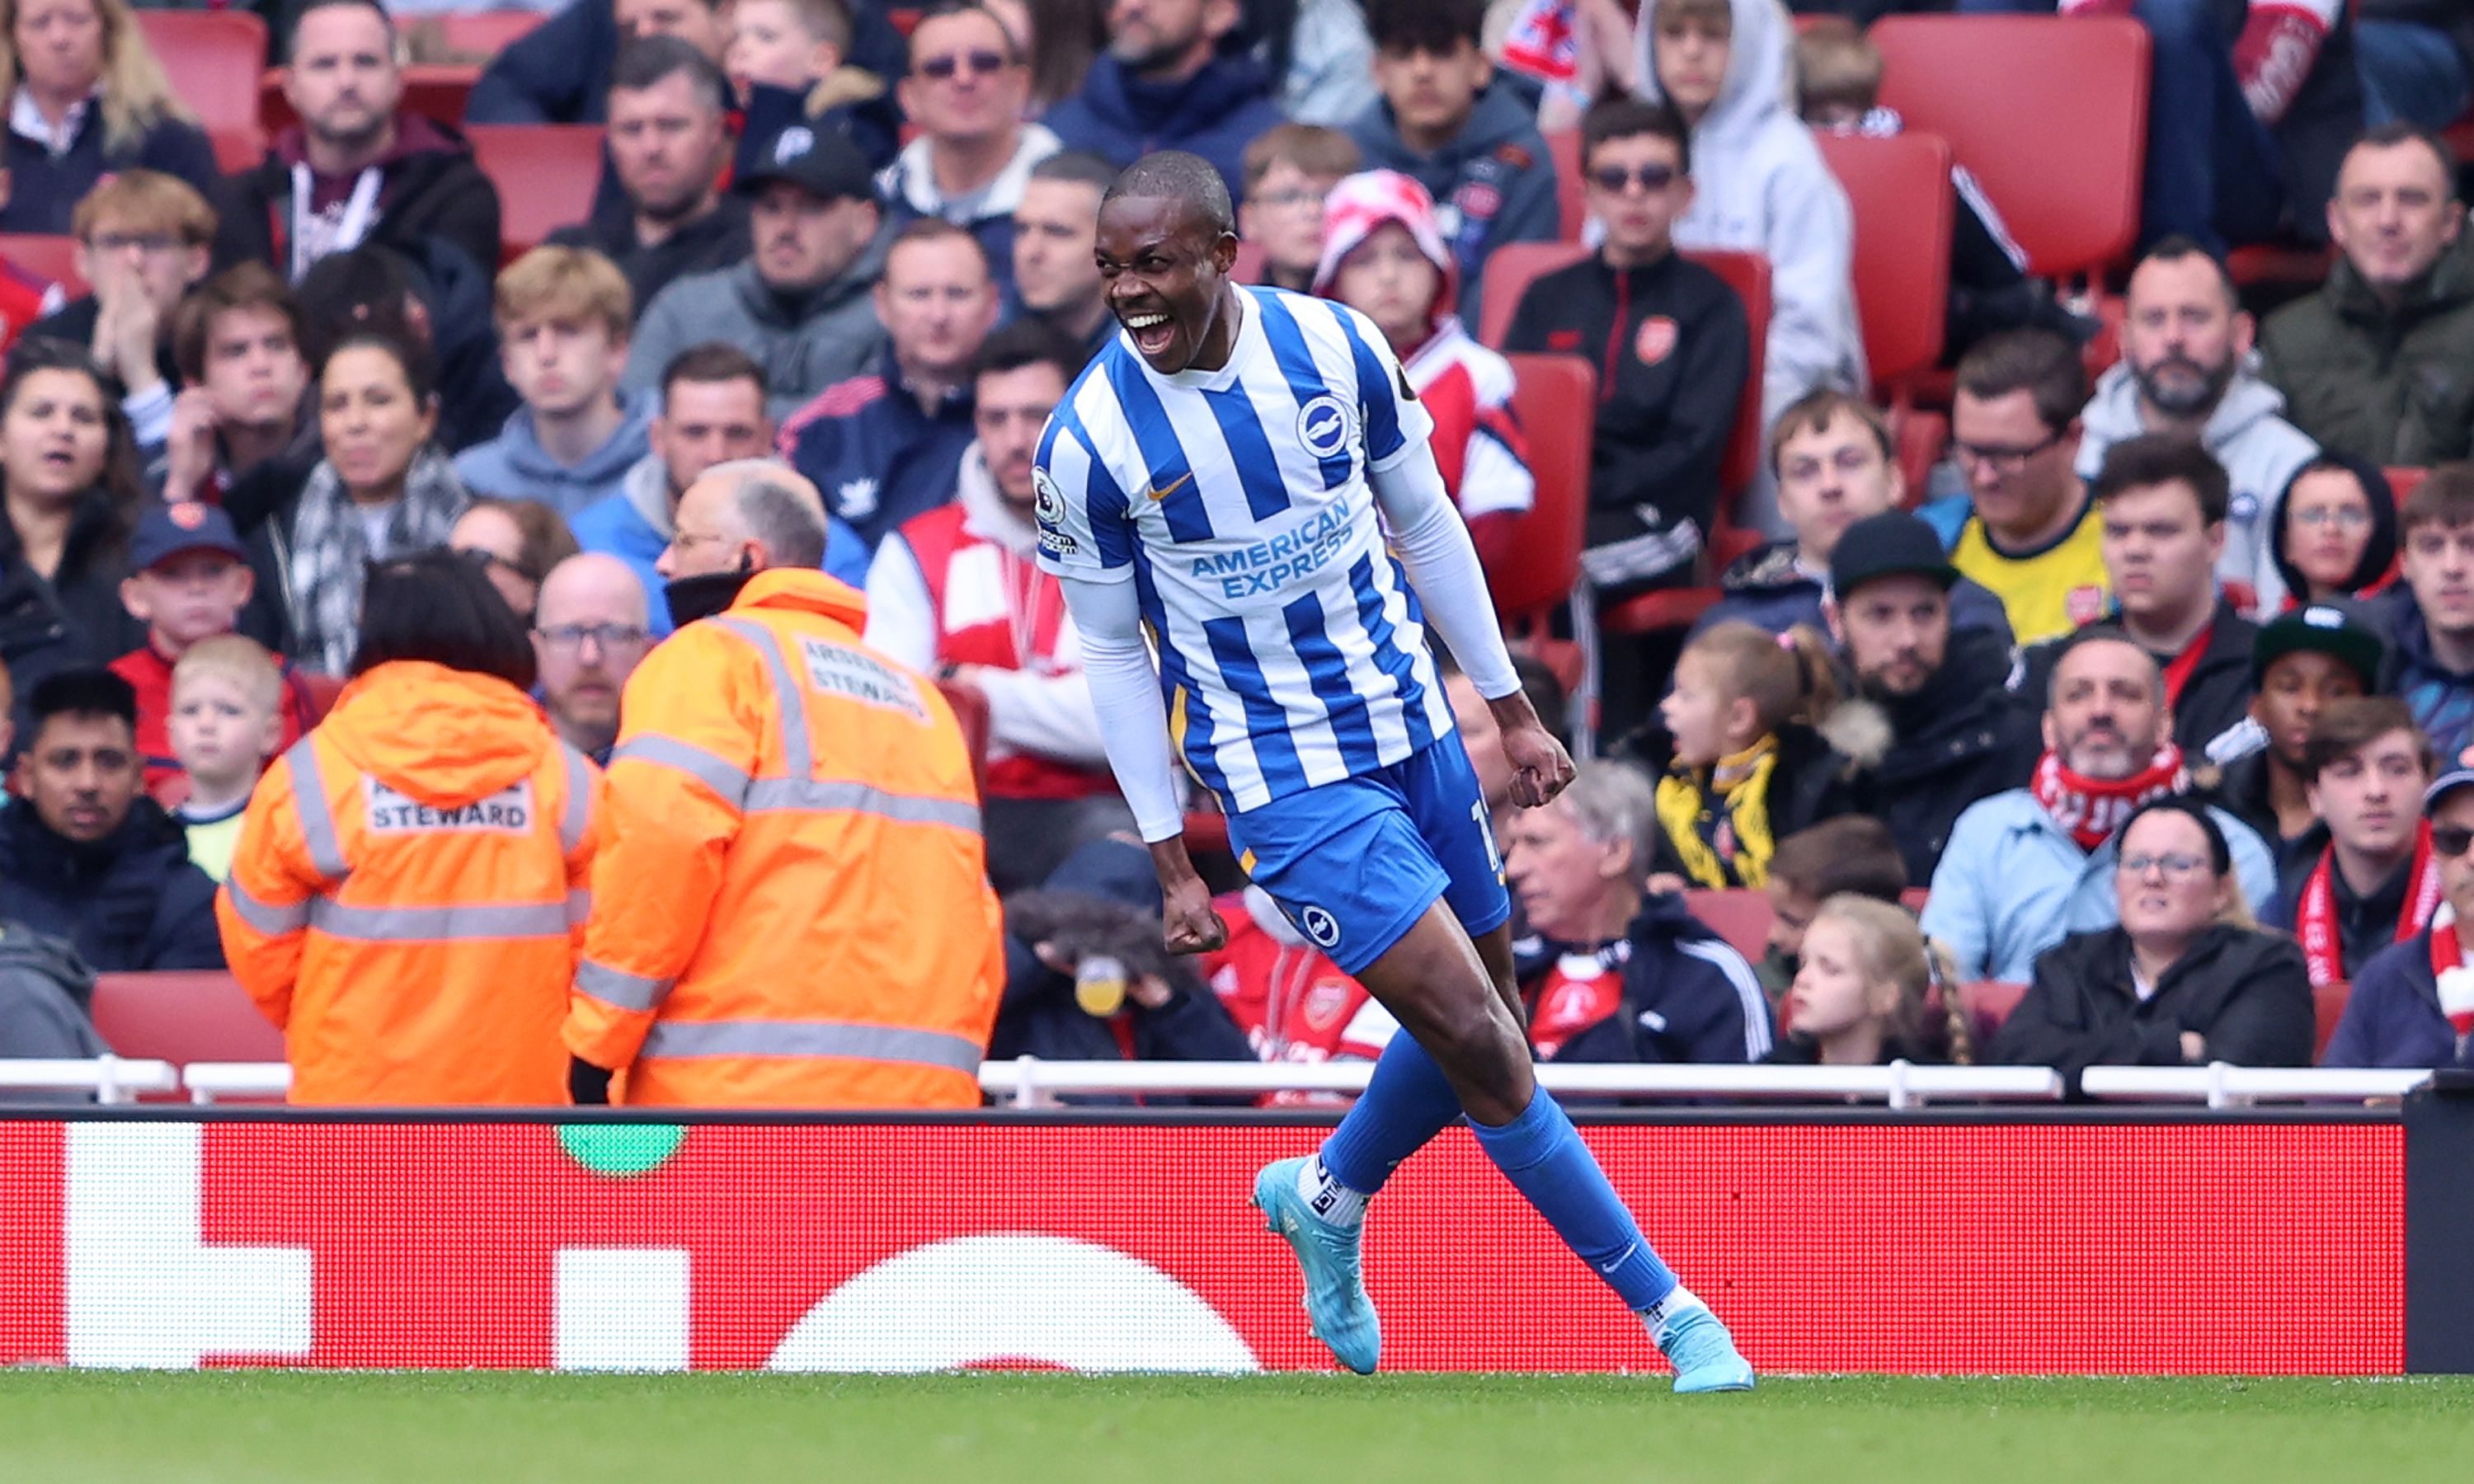 Enock Mwepu of Brighton &amp; Hove Albion celebrates after scoring their team's second goal.